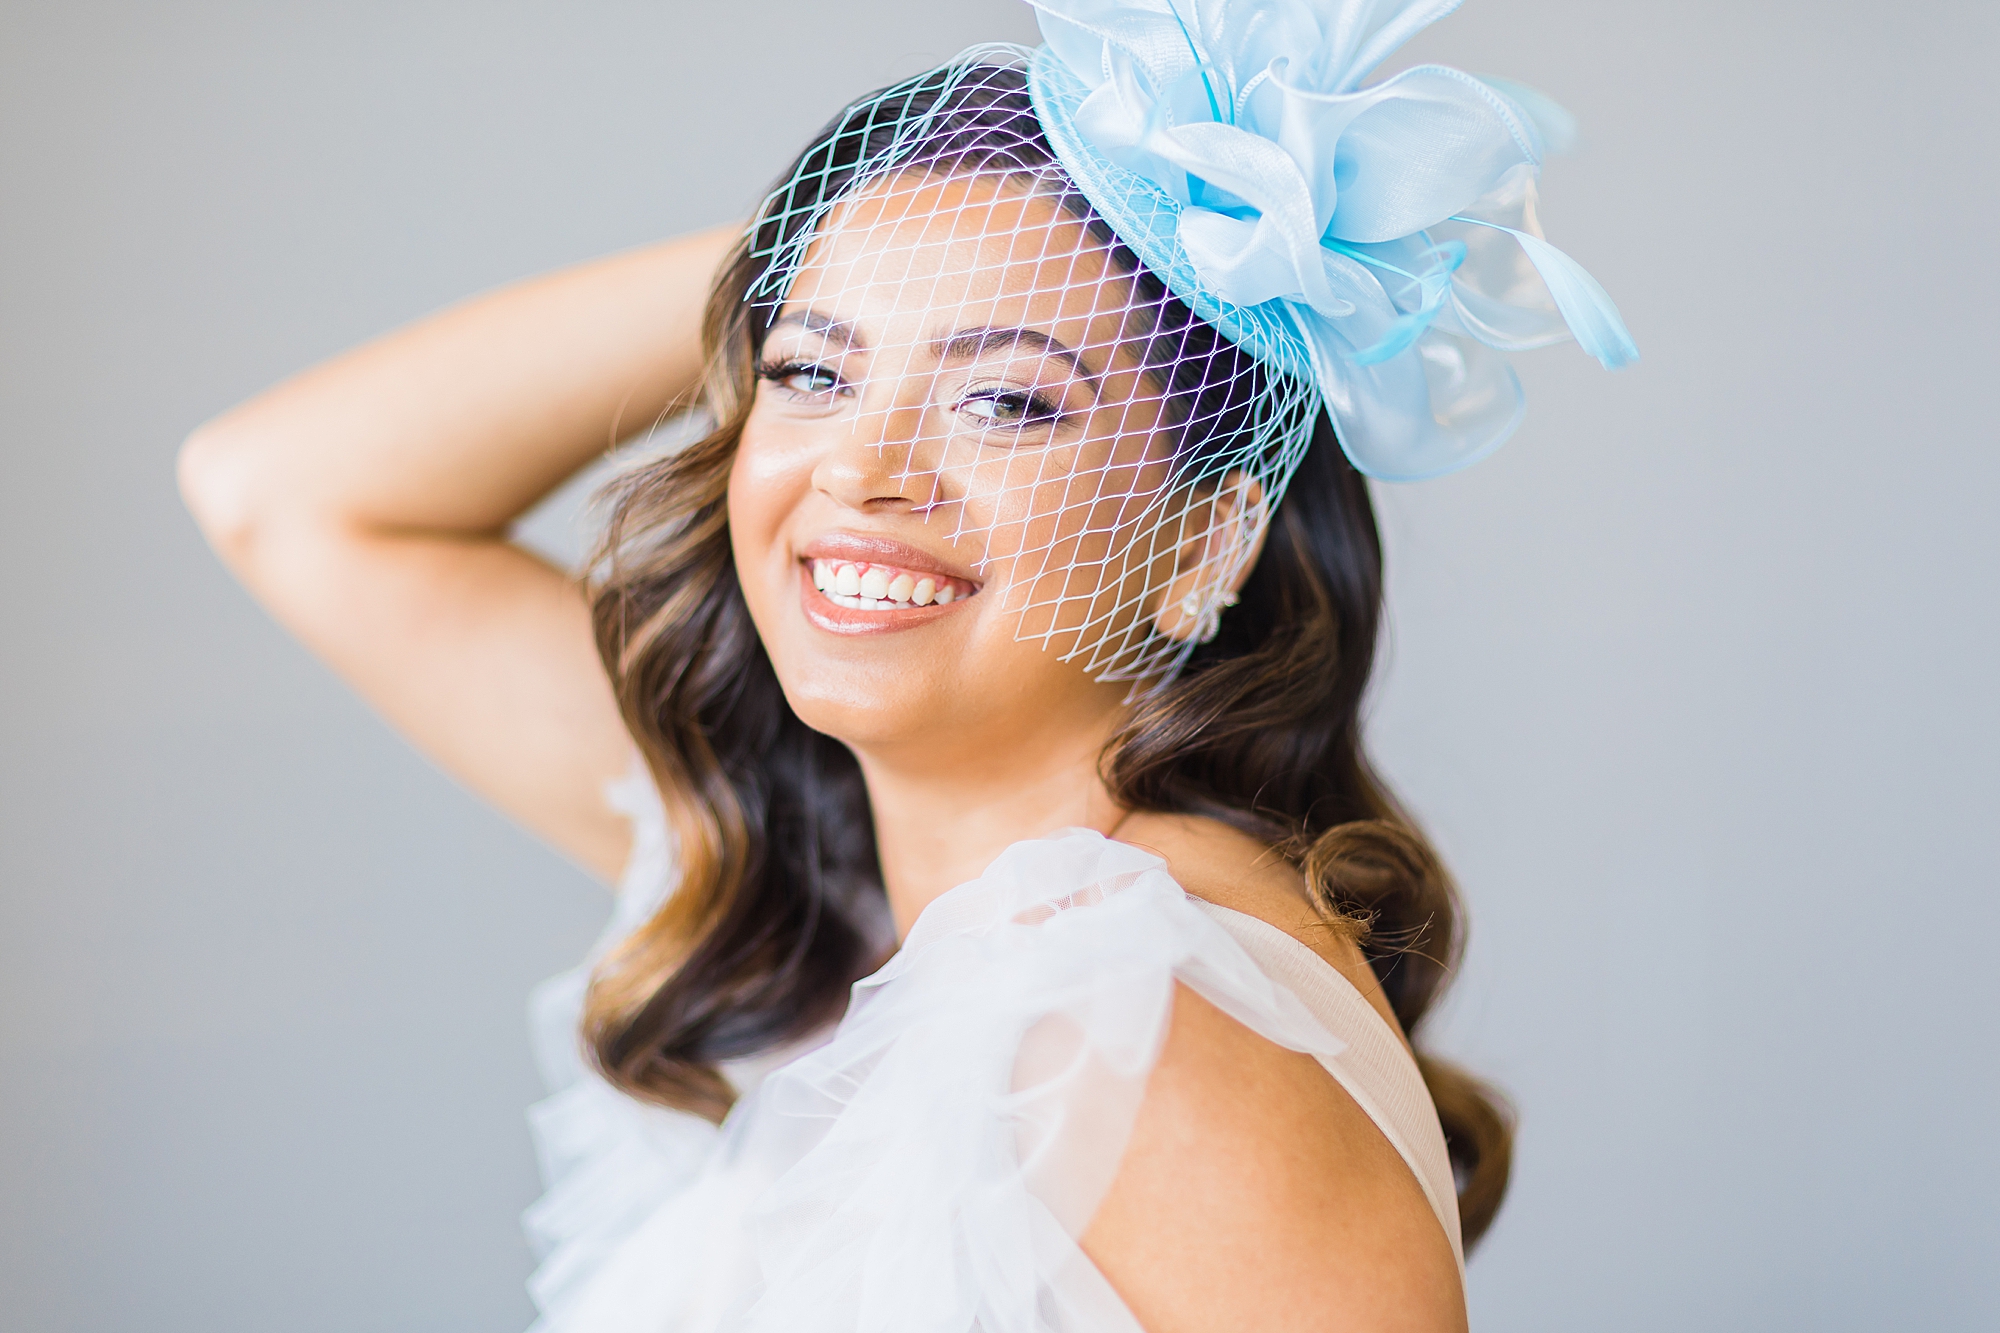 bride stands with blue birdcage on head